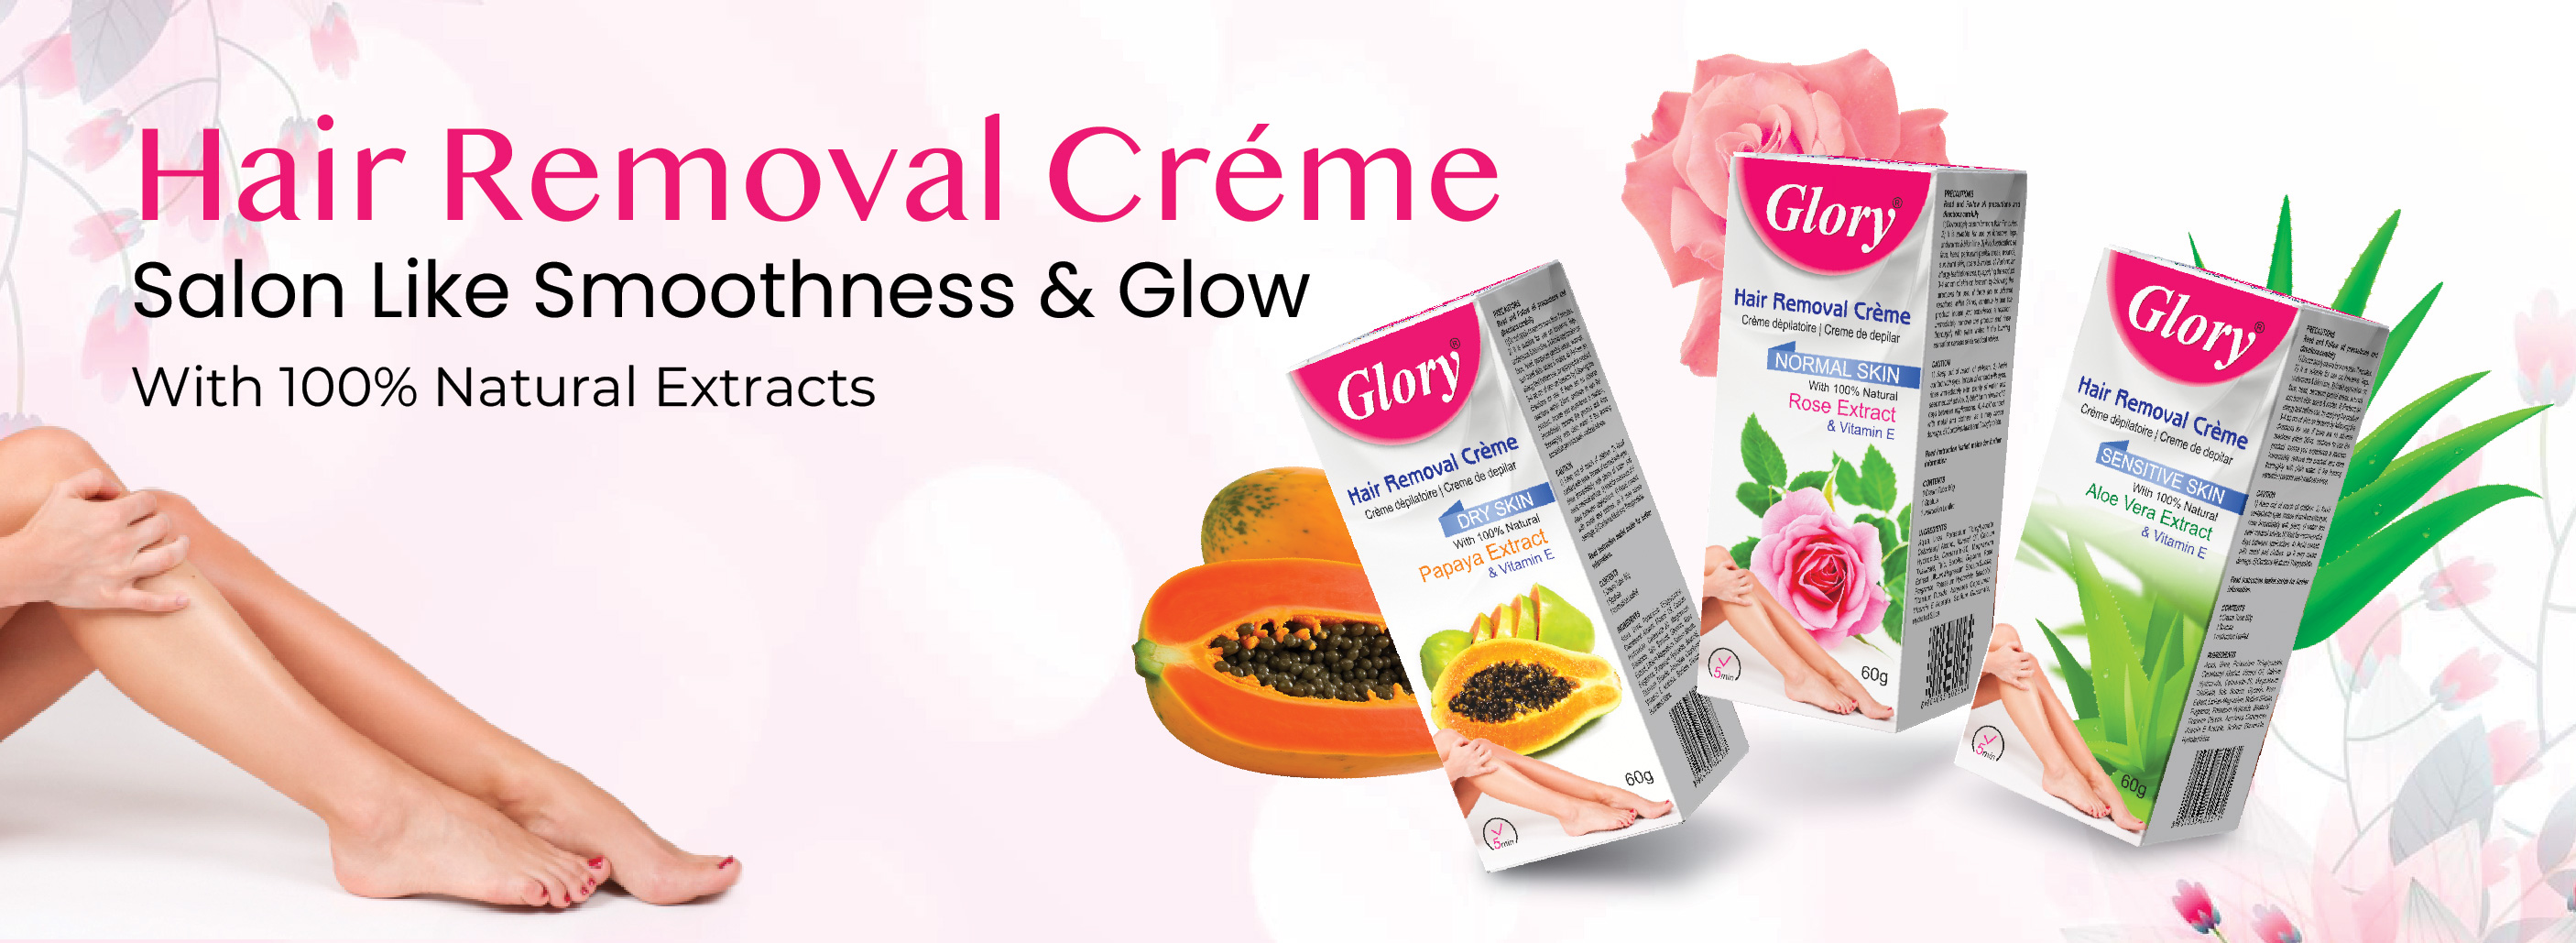 Hair Removal Creme Manufacturer | Hair Removal Creme Manufacturer in Congo